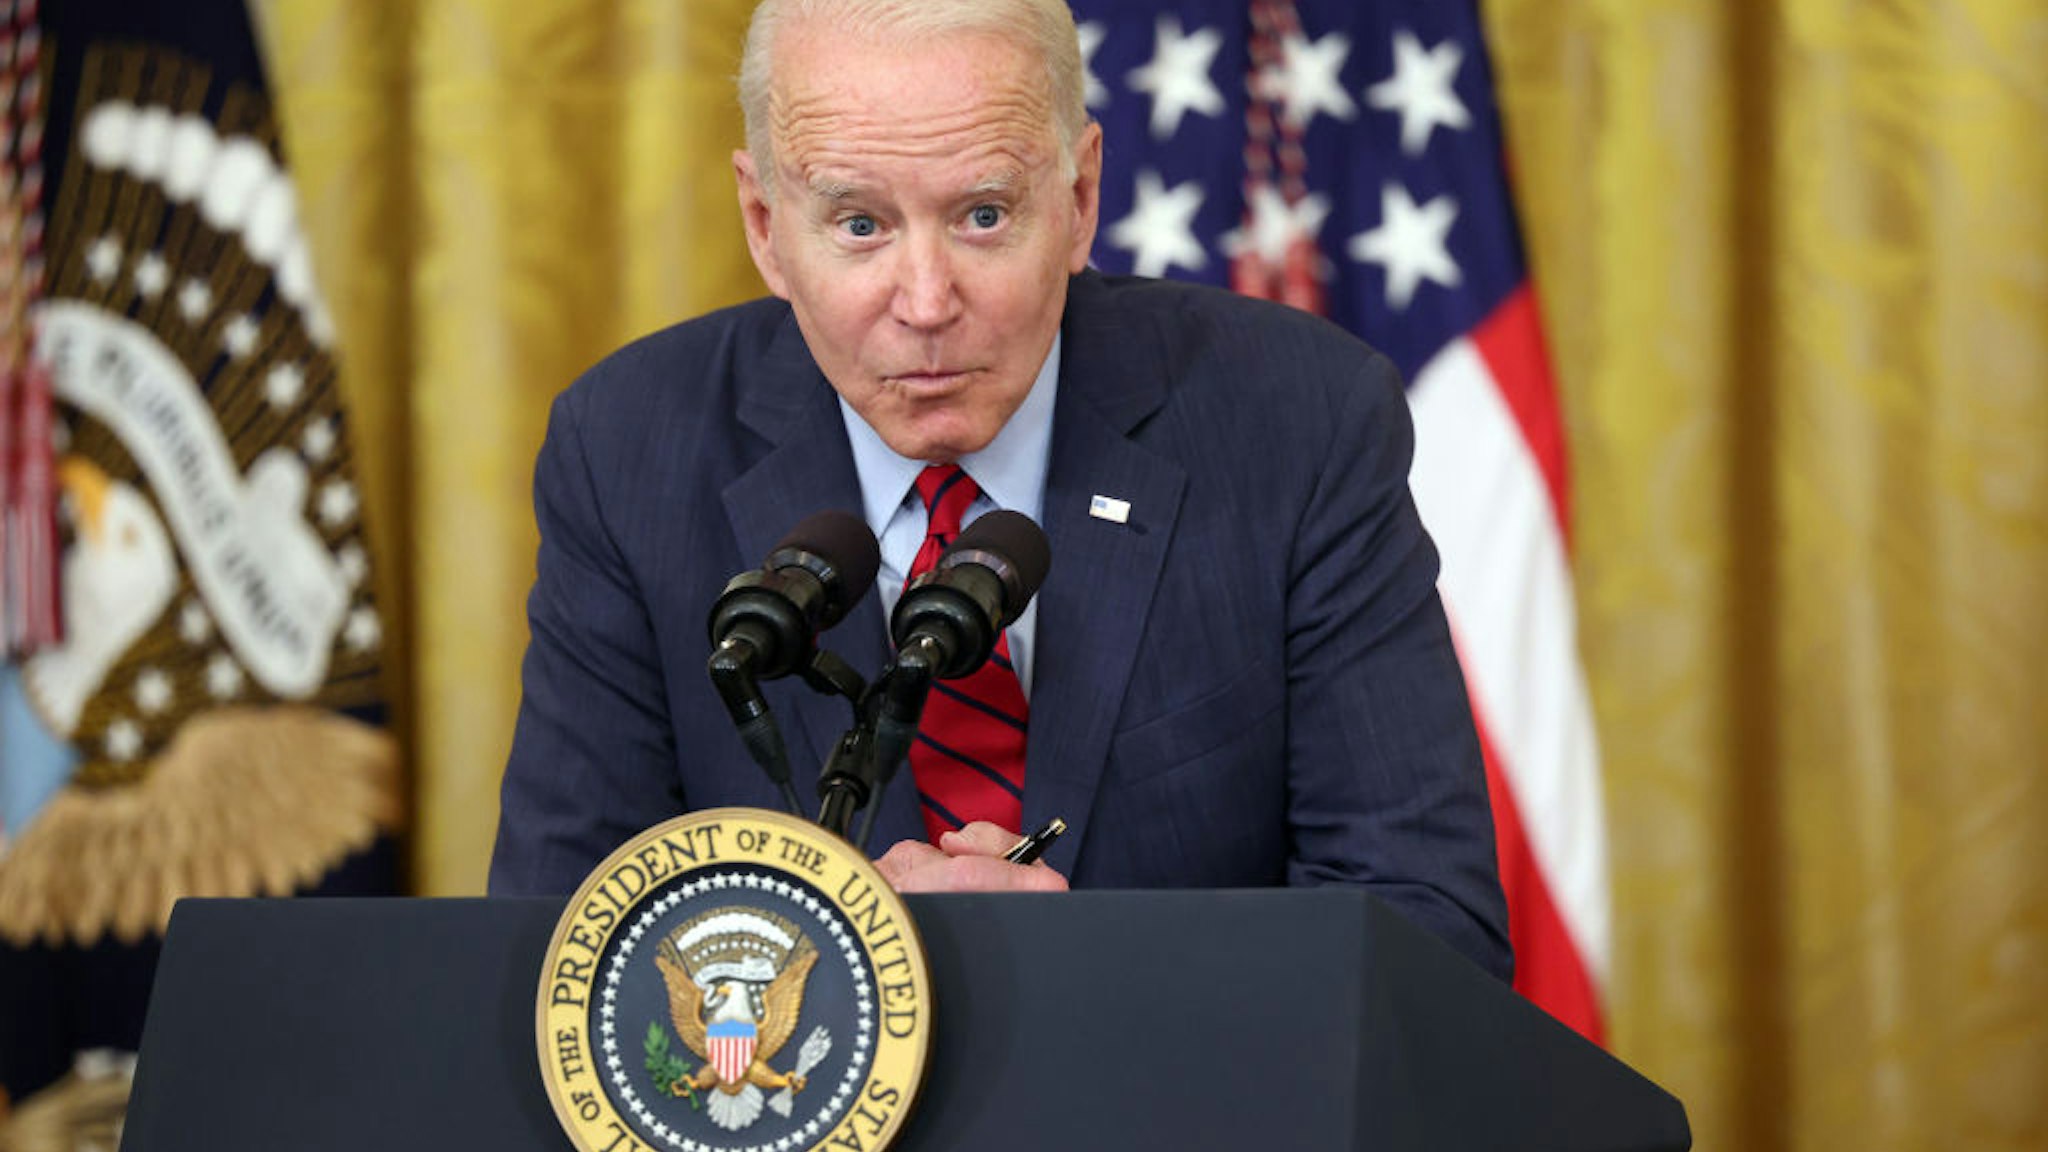 WASHINGTON, DC - JUNE 24: U.S. President Joe Biden delivers remarks on the Senate's bipartisan infrastructure deal at the White House on June 24, 2021 in Washington, DC. Biden said both sides made compromises on the nearly $1 trillion infrastructure bill (Photo by Kevin Dietsch/Getty Images)